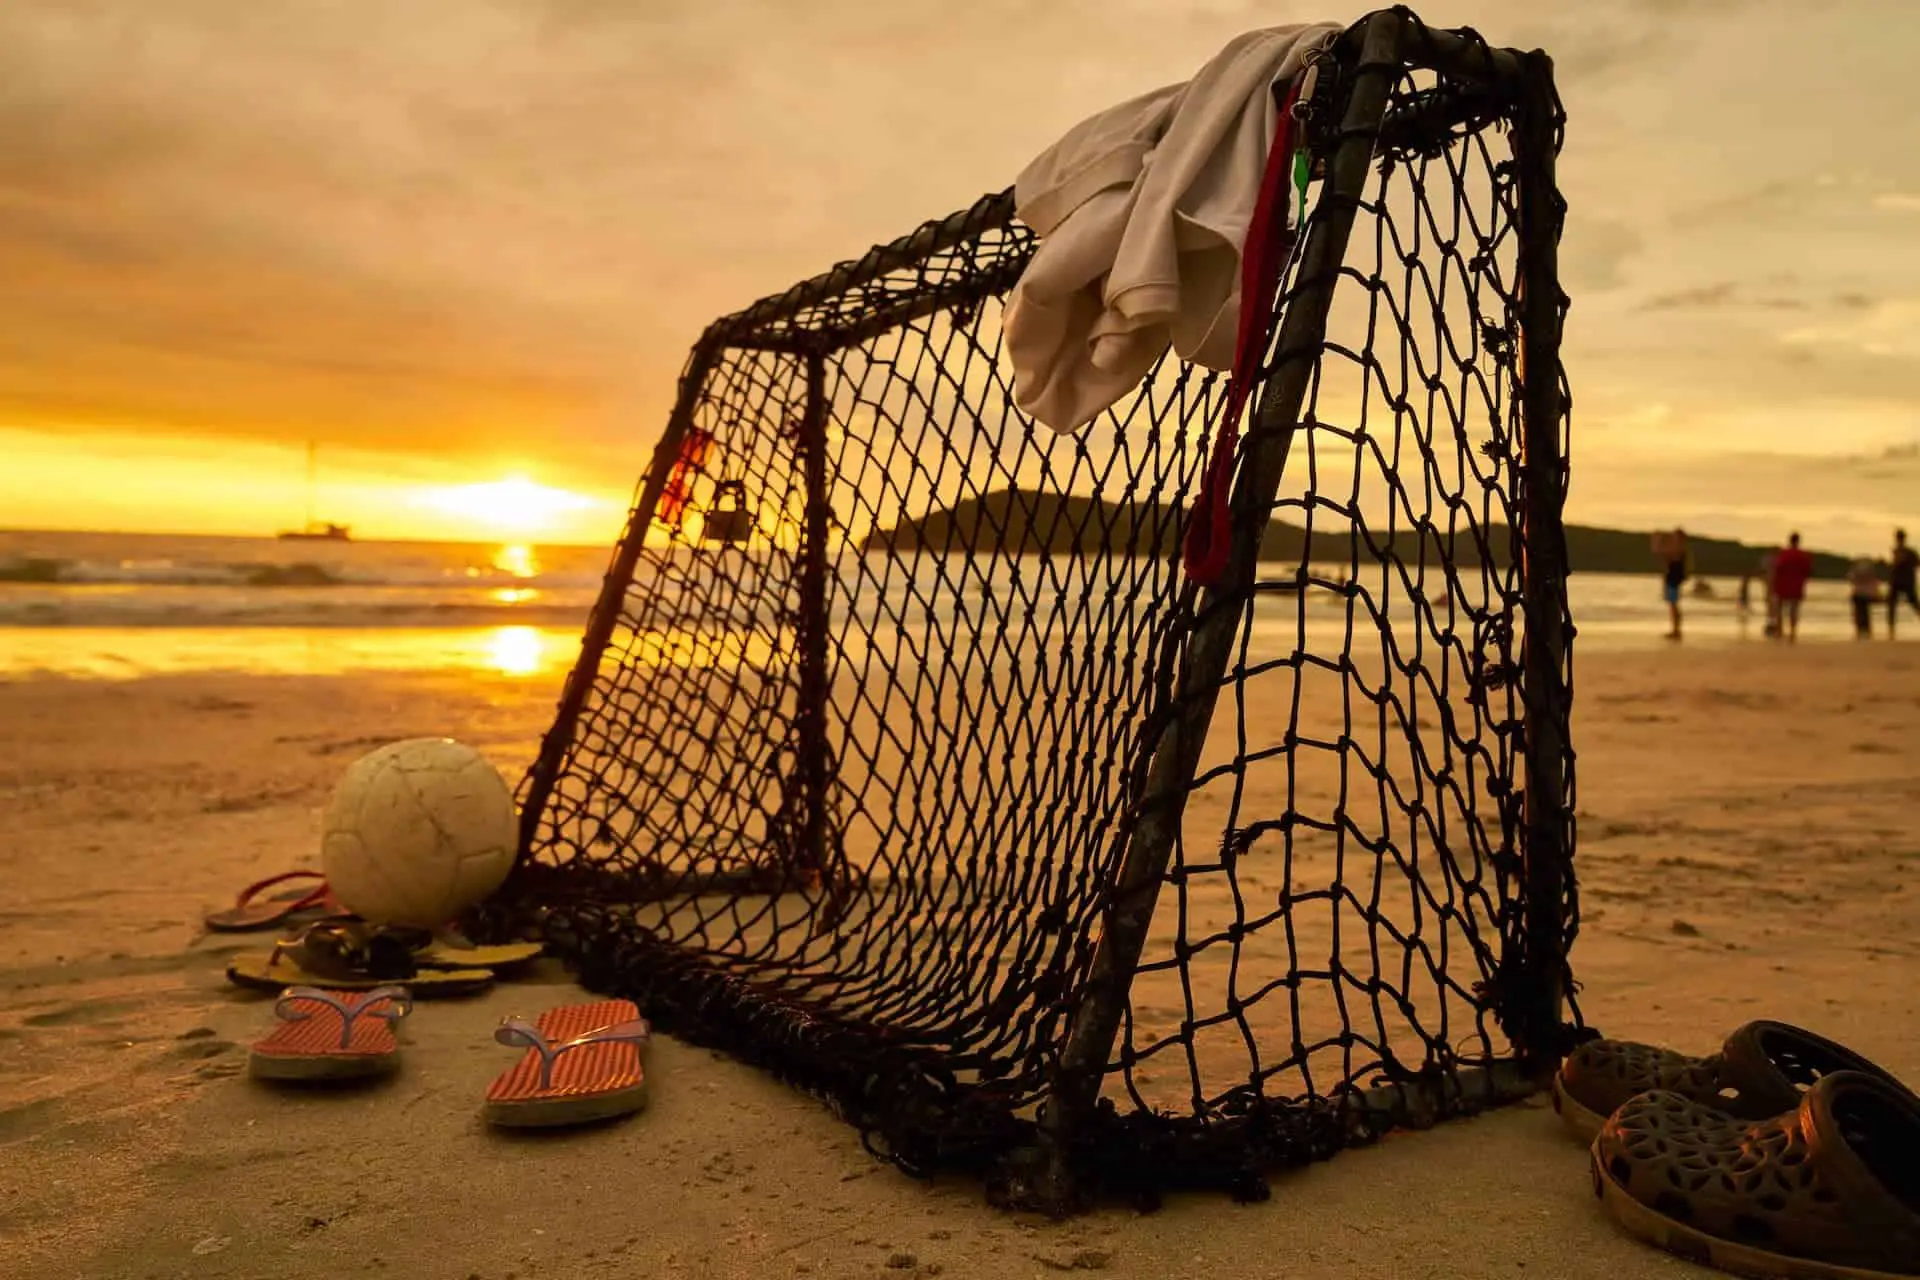 Beach soccer goal with sunset in background